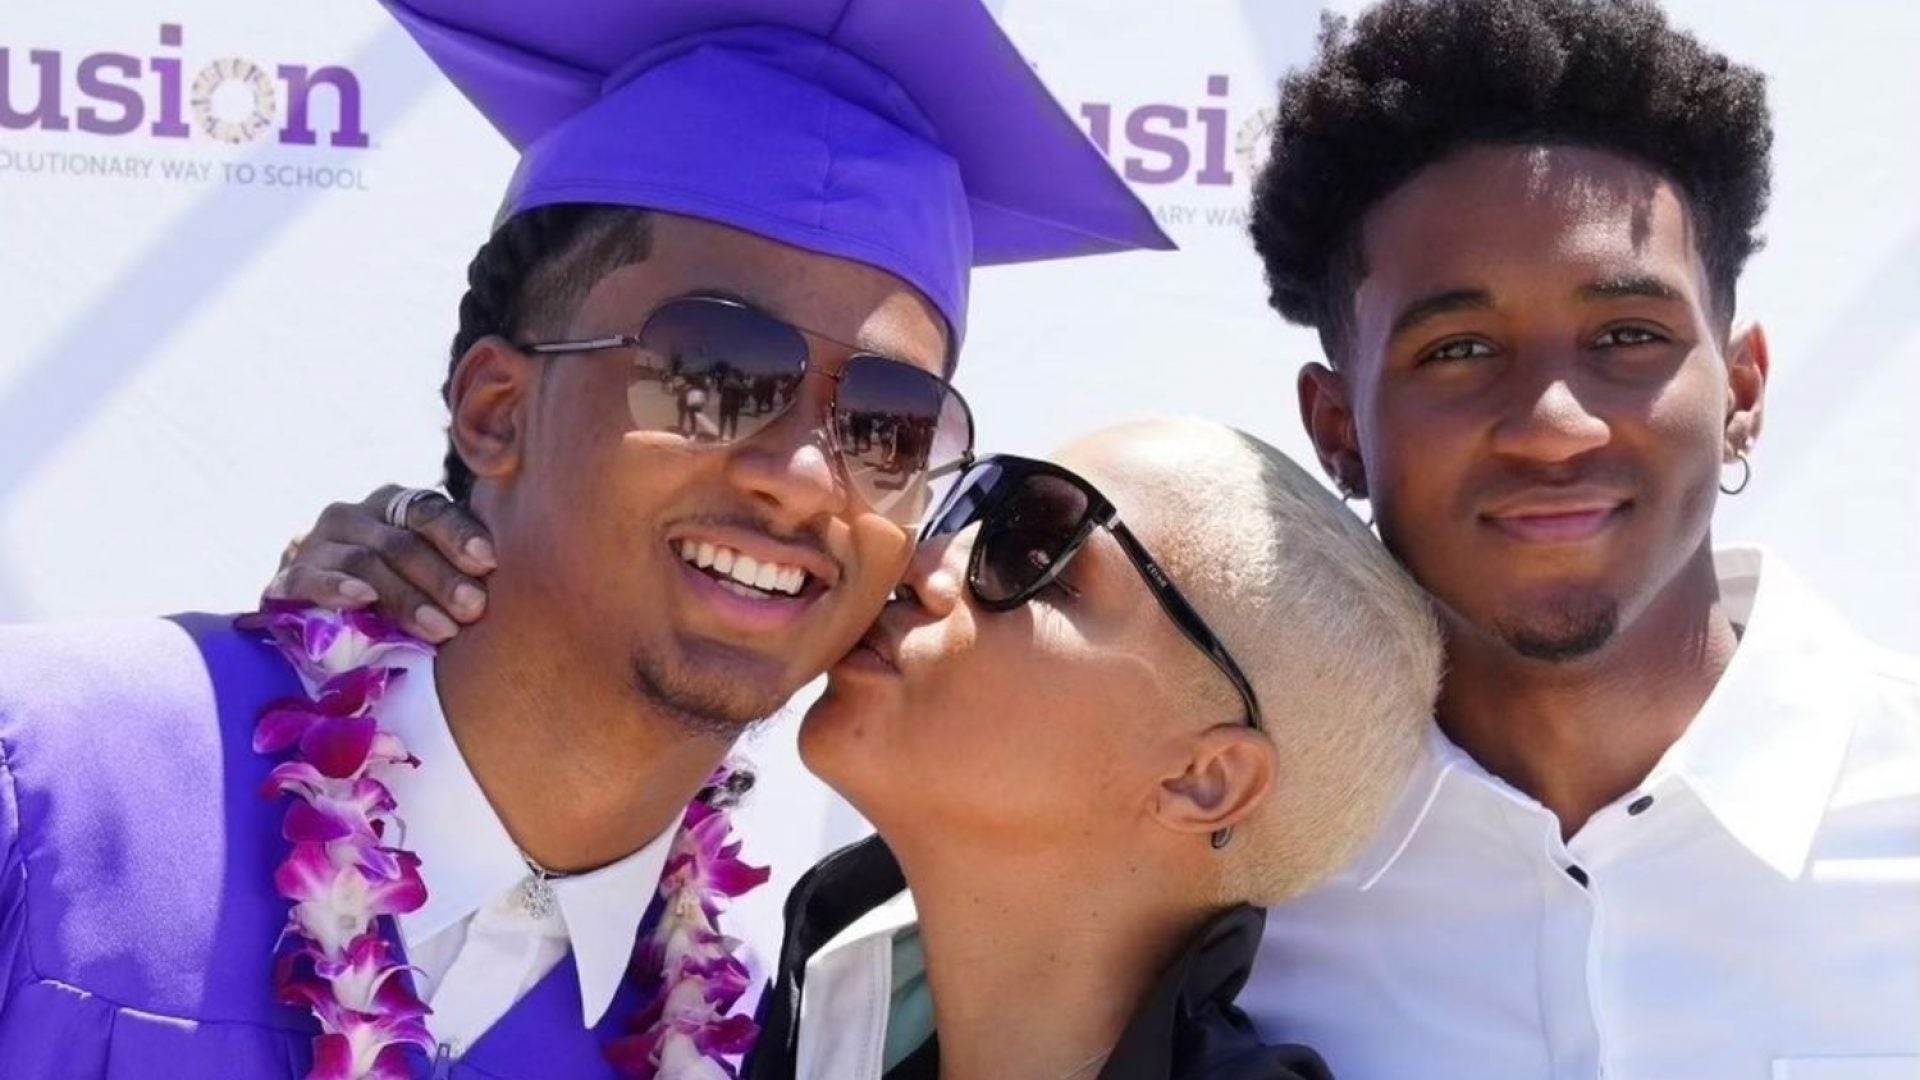 Toni Braxton's Son Diezel Is Headed To Howard University And We Feel Old